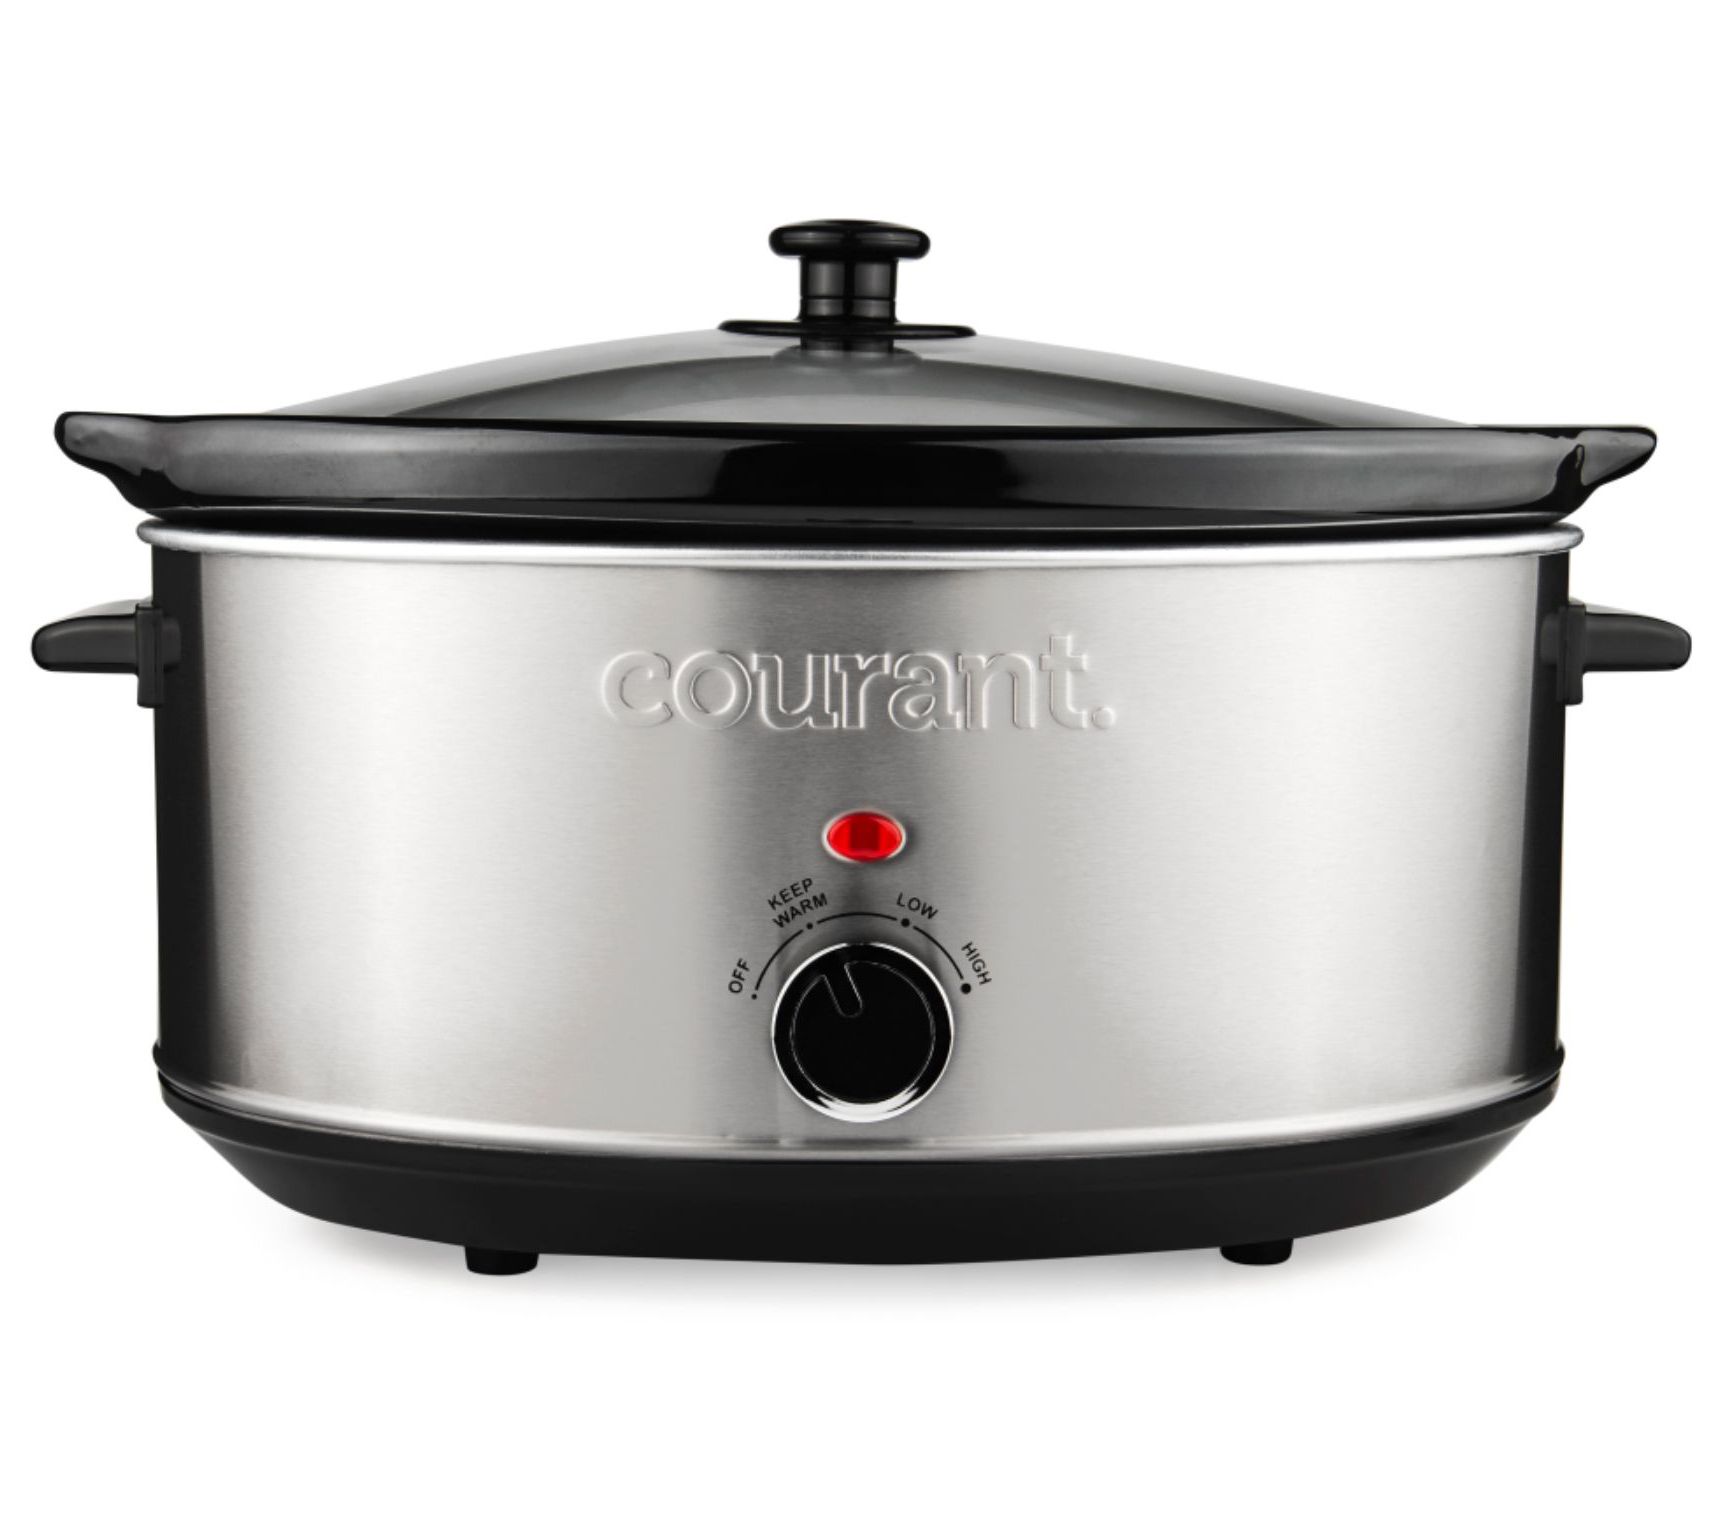 2 qt Oval Stainless Steel Slow Cooker - Silver